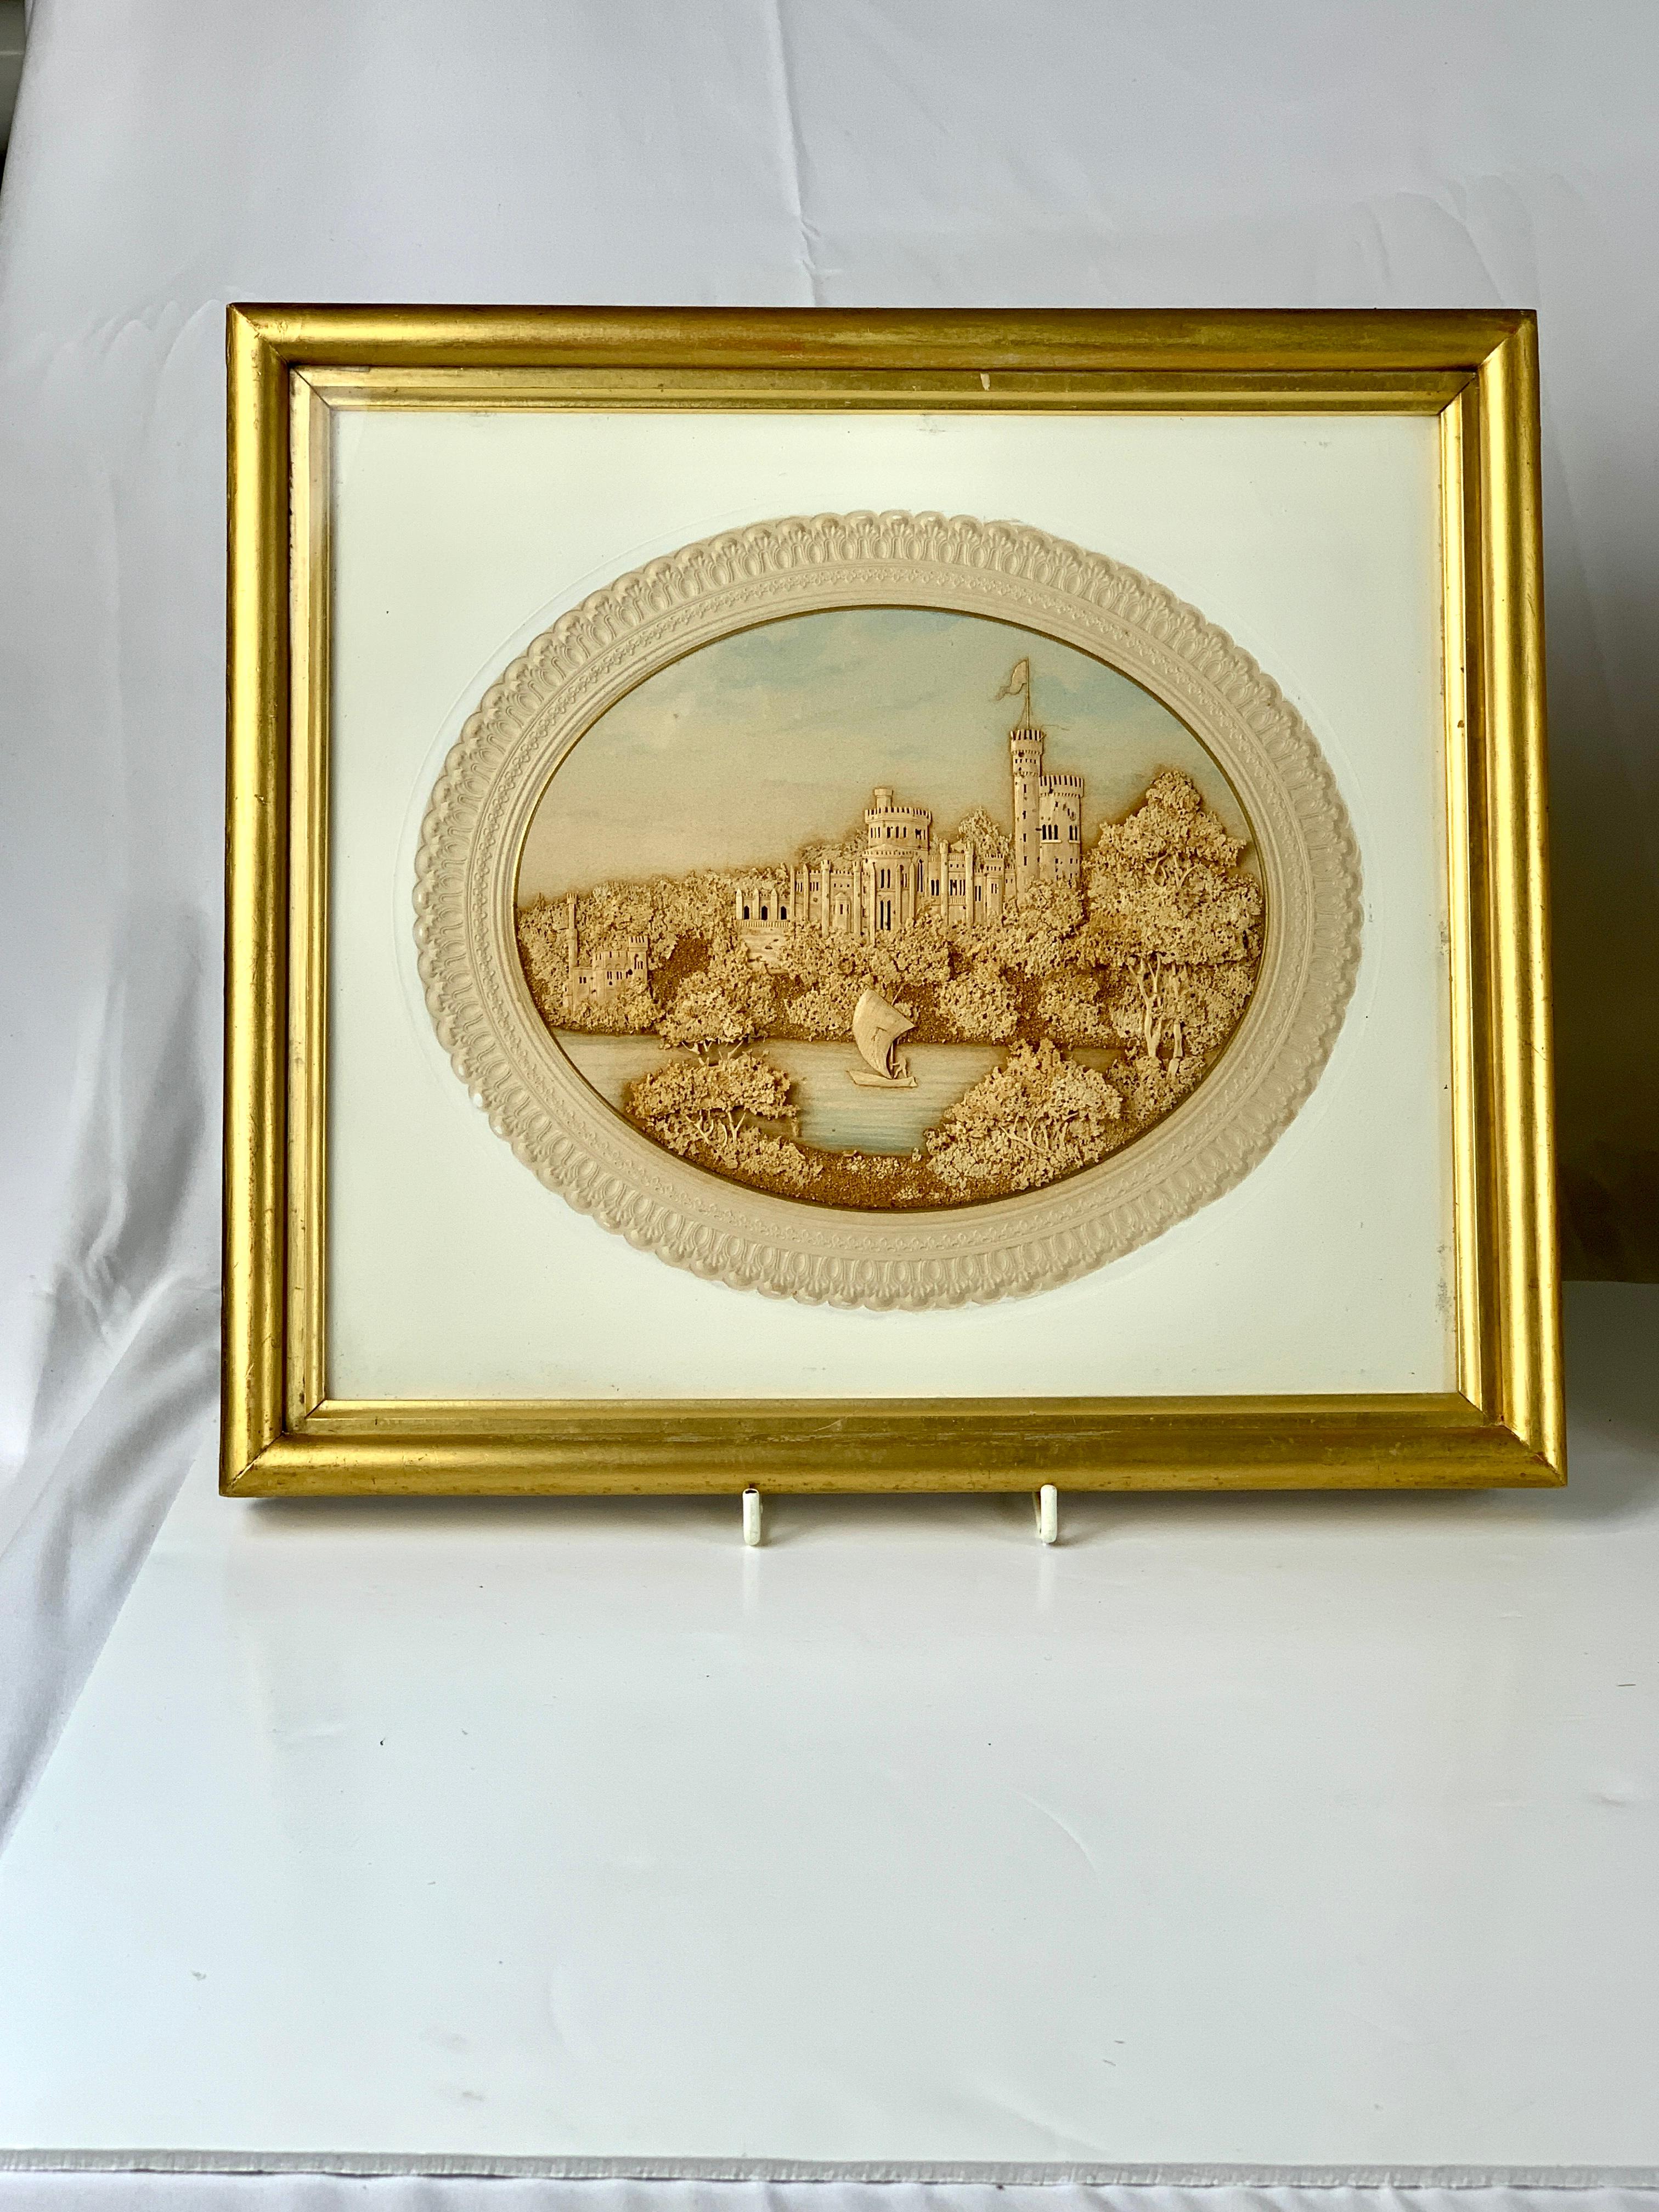 Romantic Pair Hand Crafted Corkwork Dioramas with Scenes of English Castles Circa 1840 For Sale